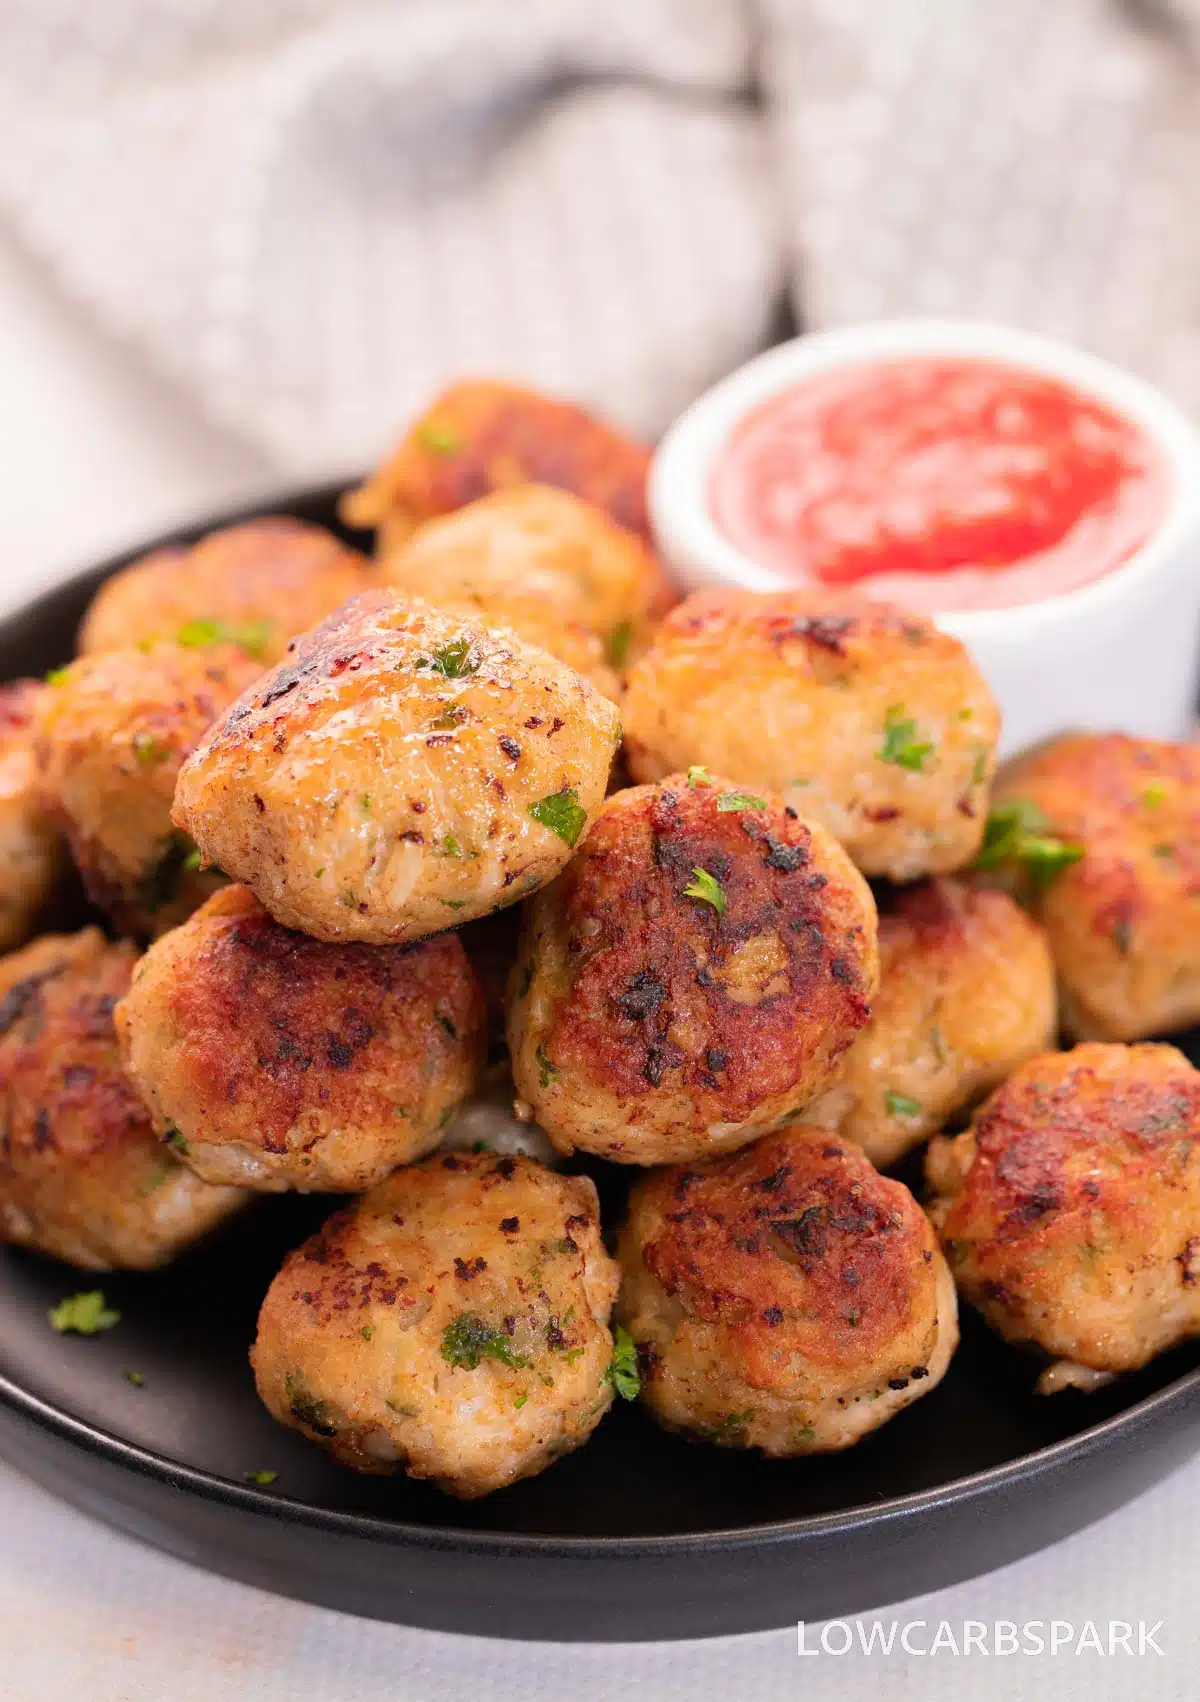 keto chicken meatballs for party finger foods.